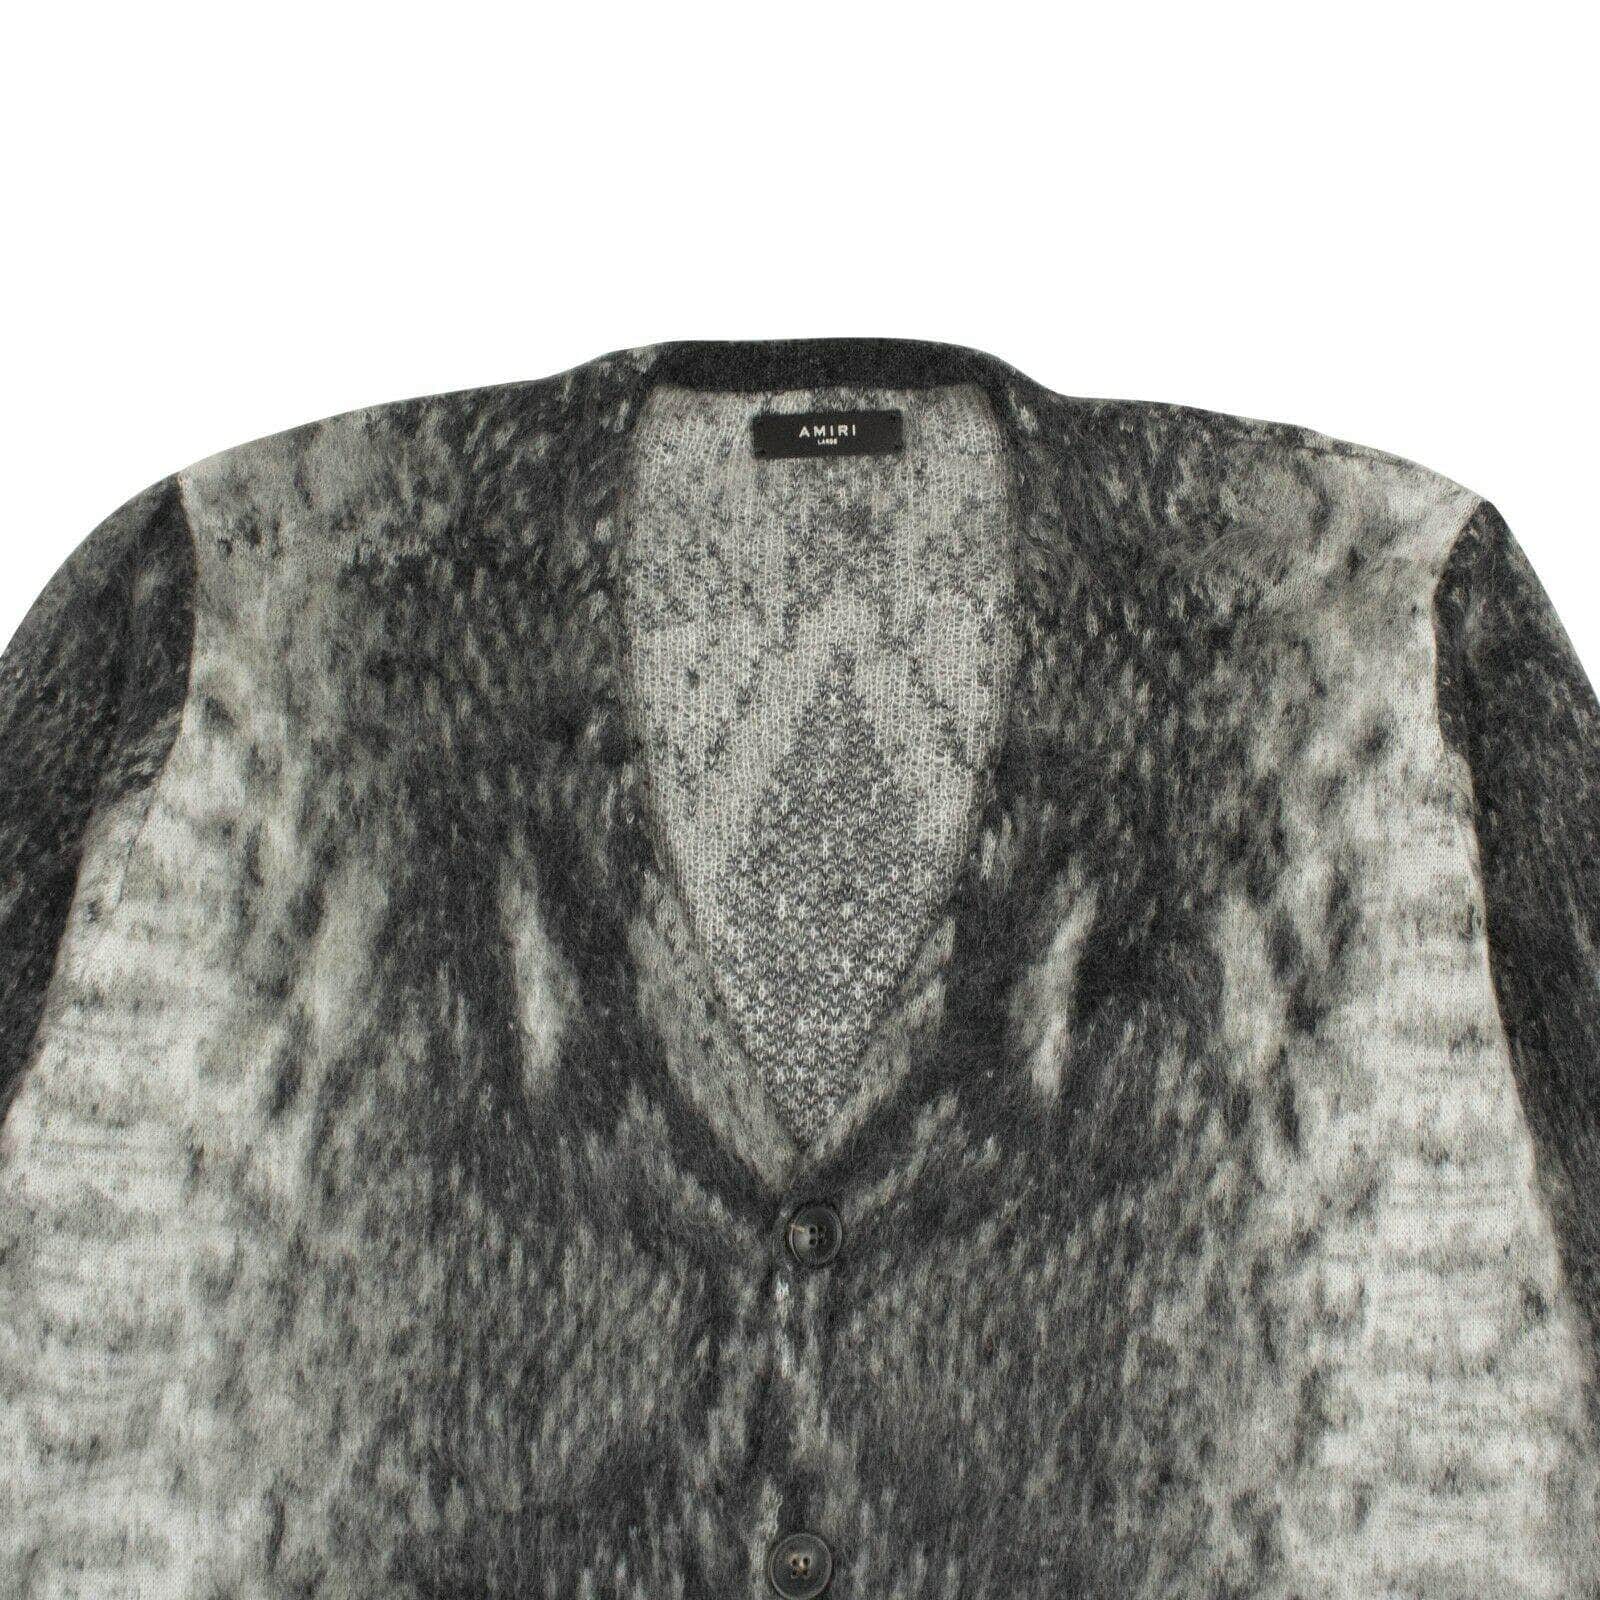 Amiri 500-750, amiri, channelenable-all, chicmi, couponcollection, gender-womens, main-clothing, size-l, size-m, size-s, womens-cardigans Dark Gray Oversized Snakeskin Print Cardigan Sweater